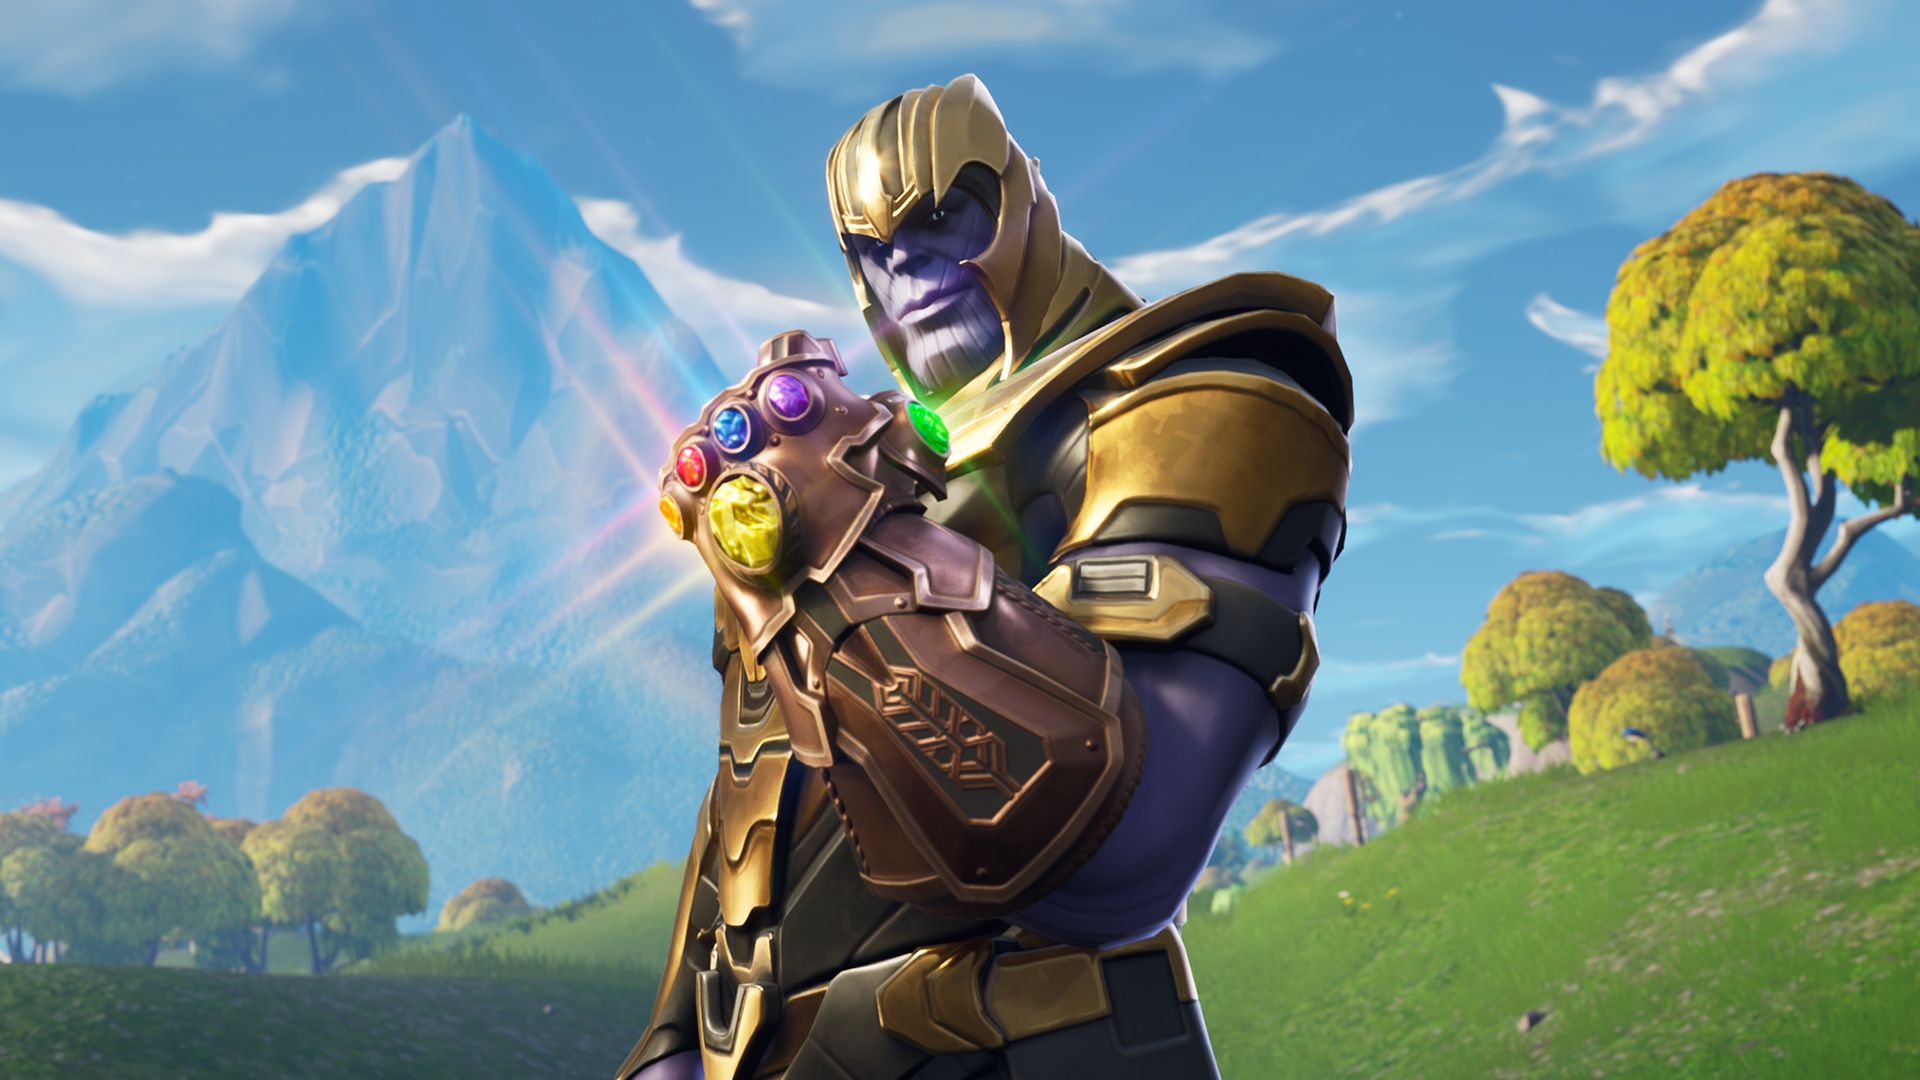 Thanos and the Infinity Gauntlet in Fortnite!